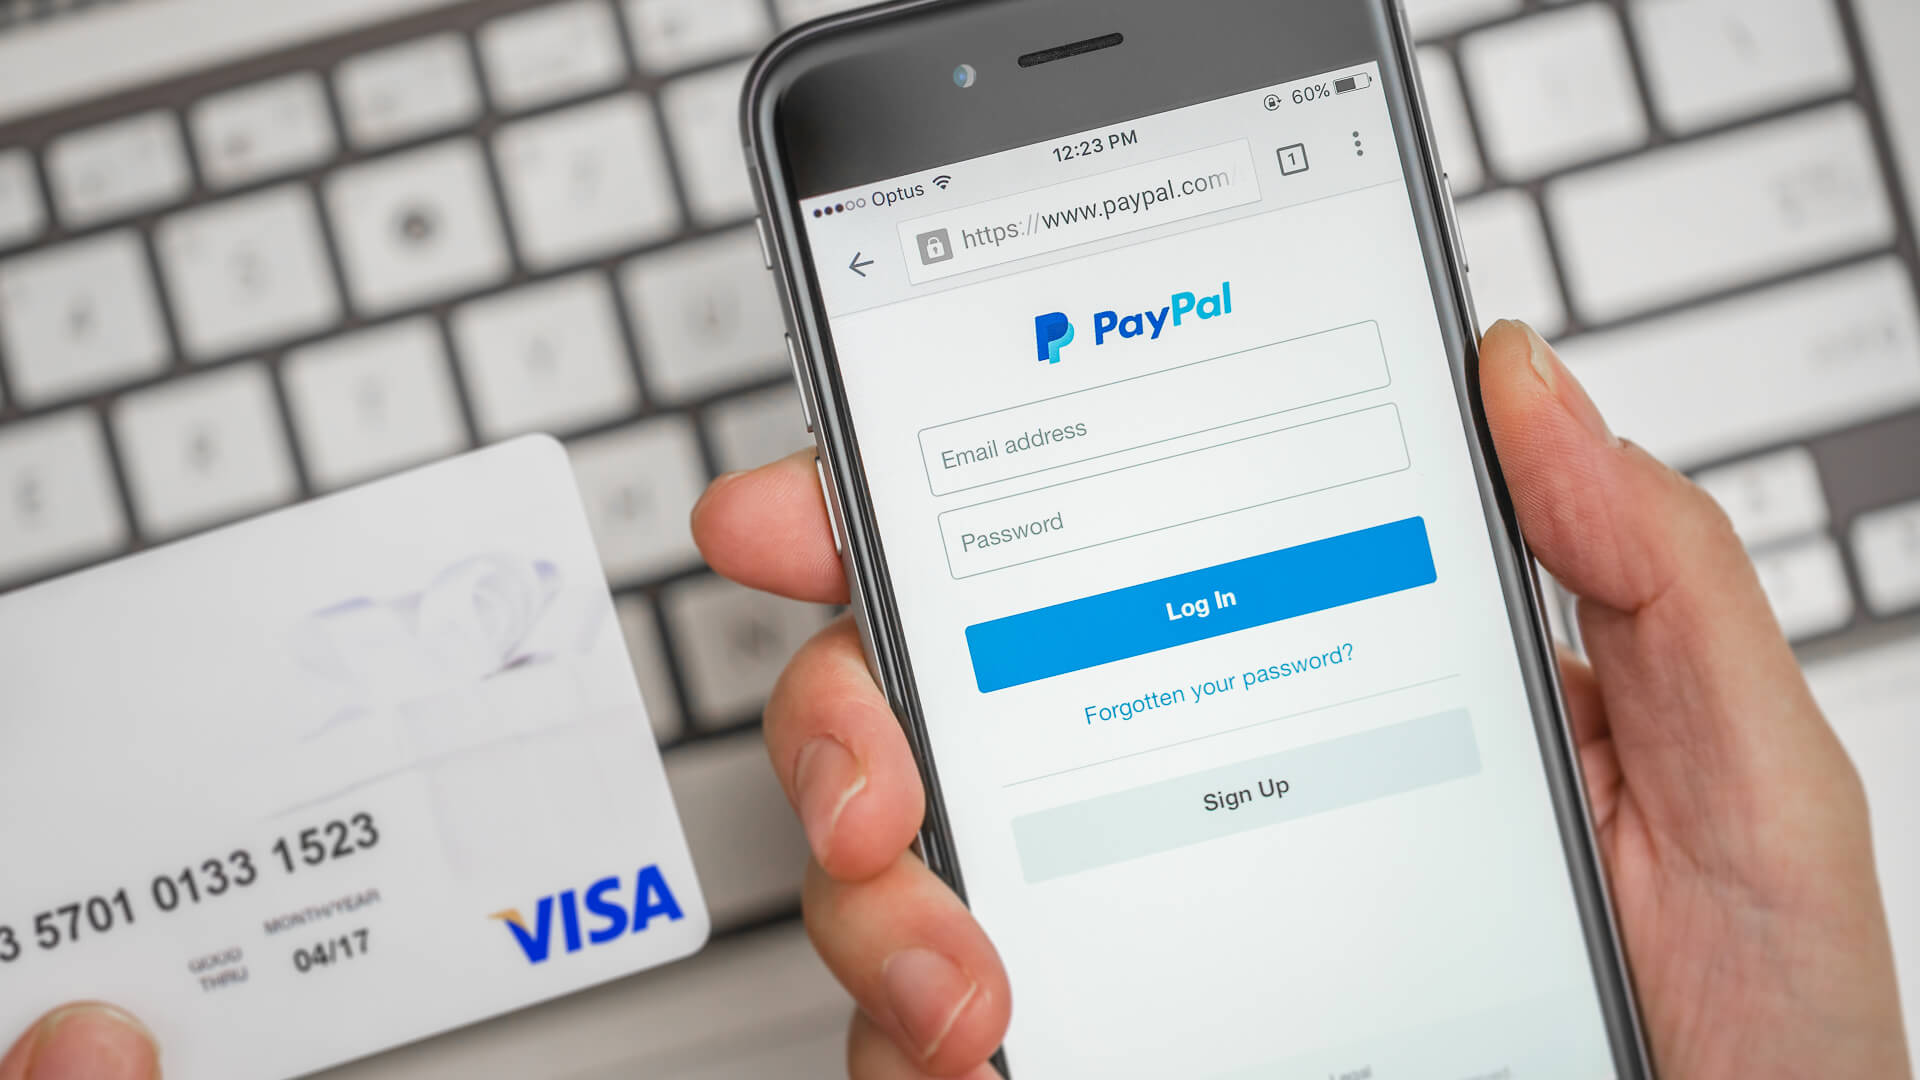 PayPal-app-with-credit-card-shutterstock_418042027-1